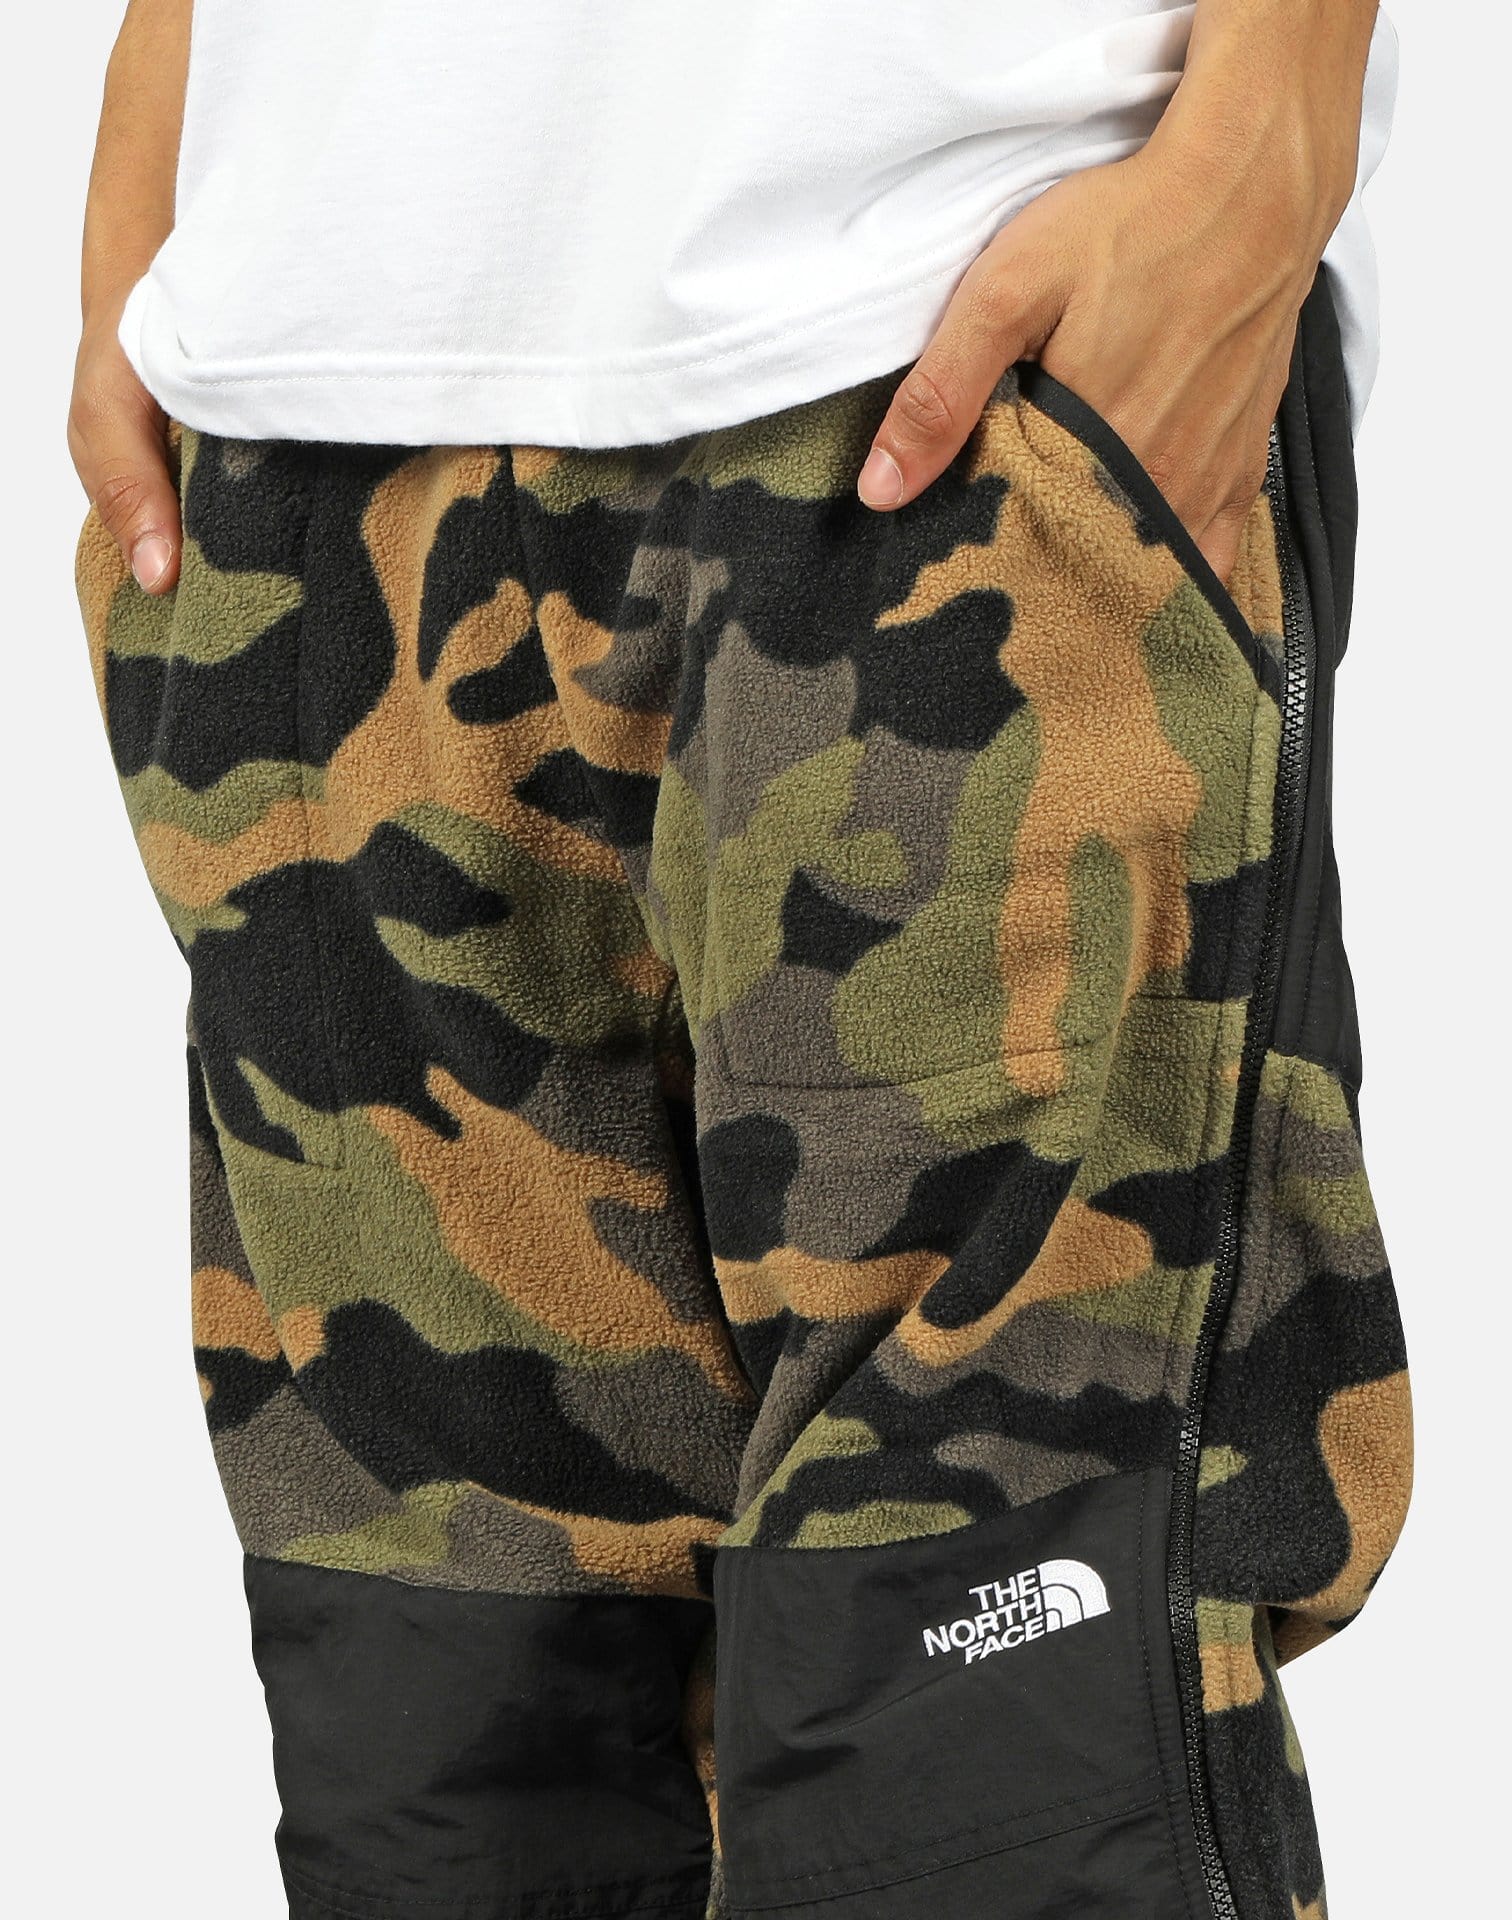 the north face camo pants